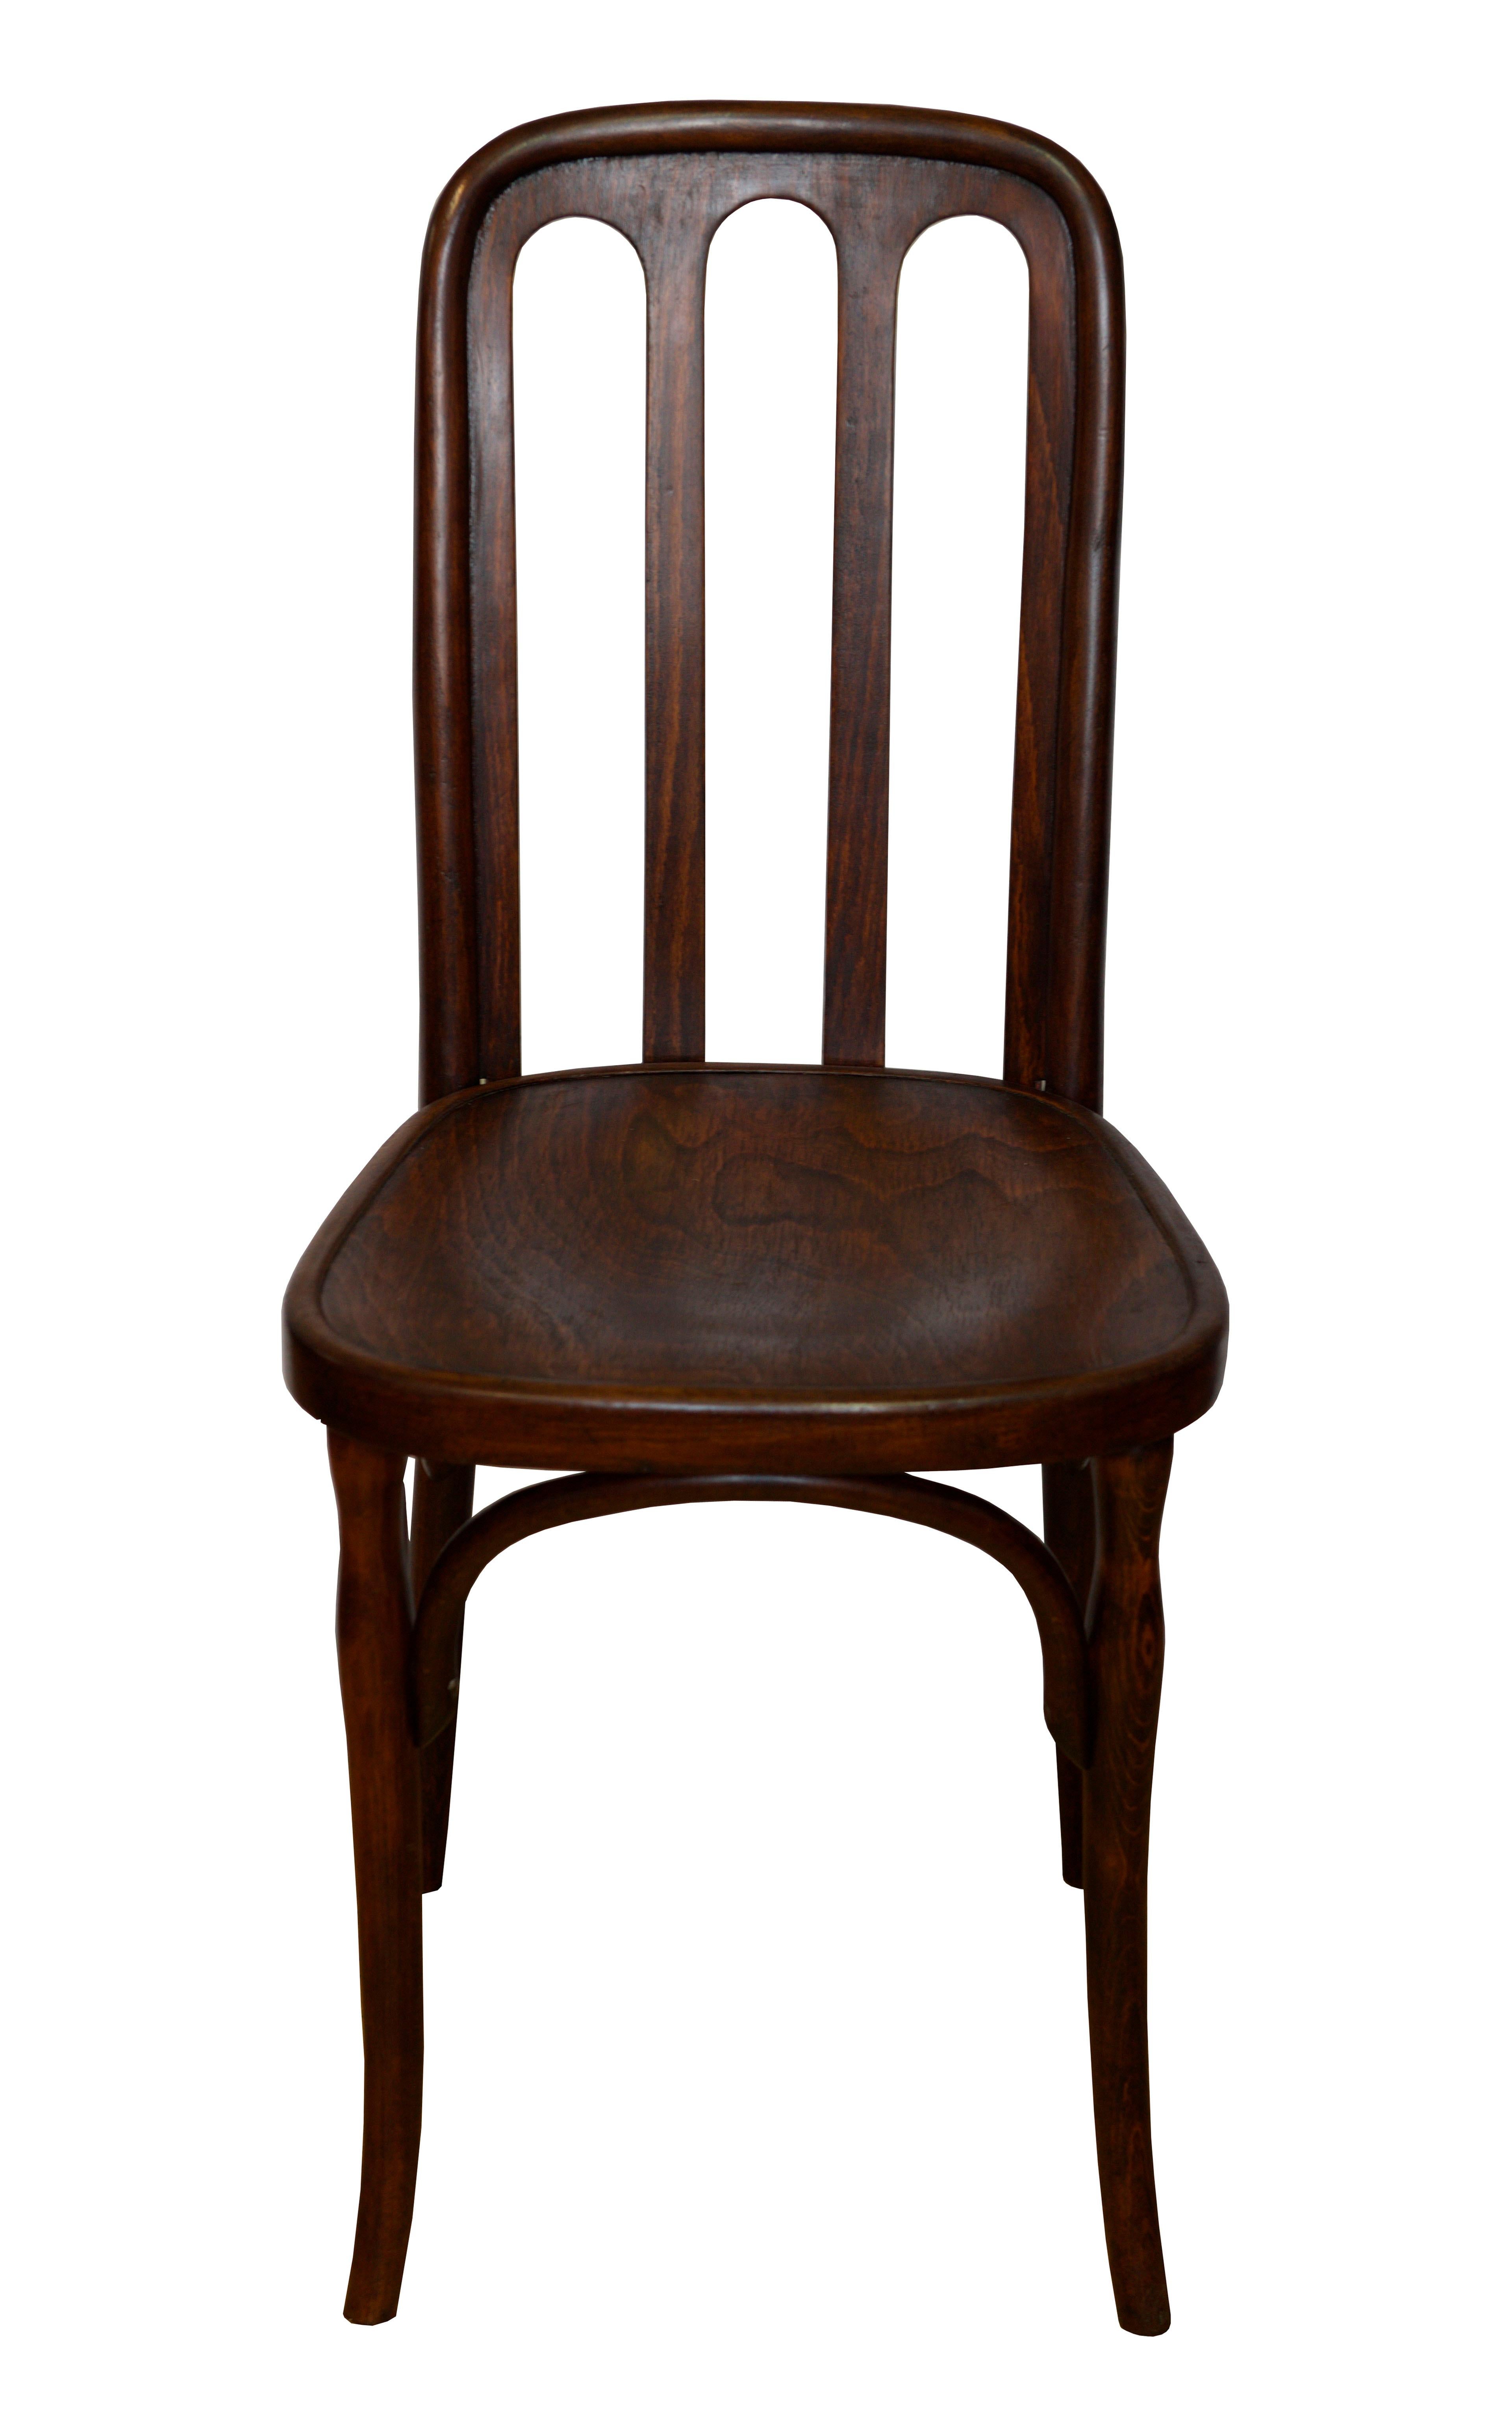 Other Dining Chair by Josef Hoffmann for J. & J. Kohn